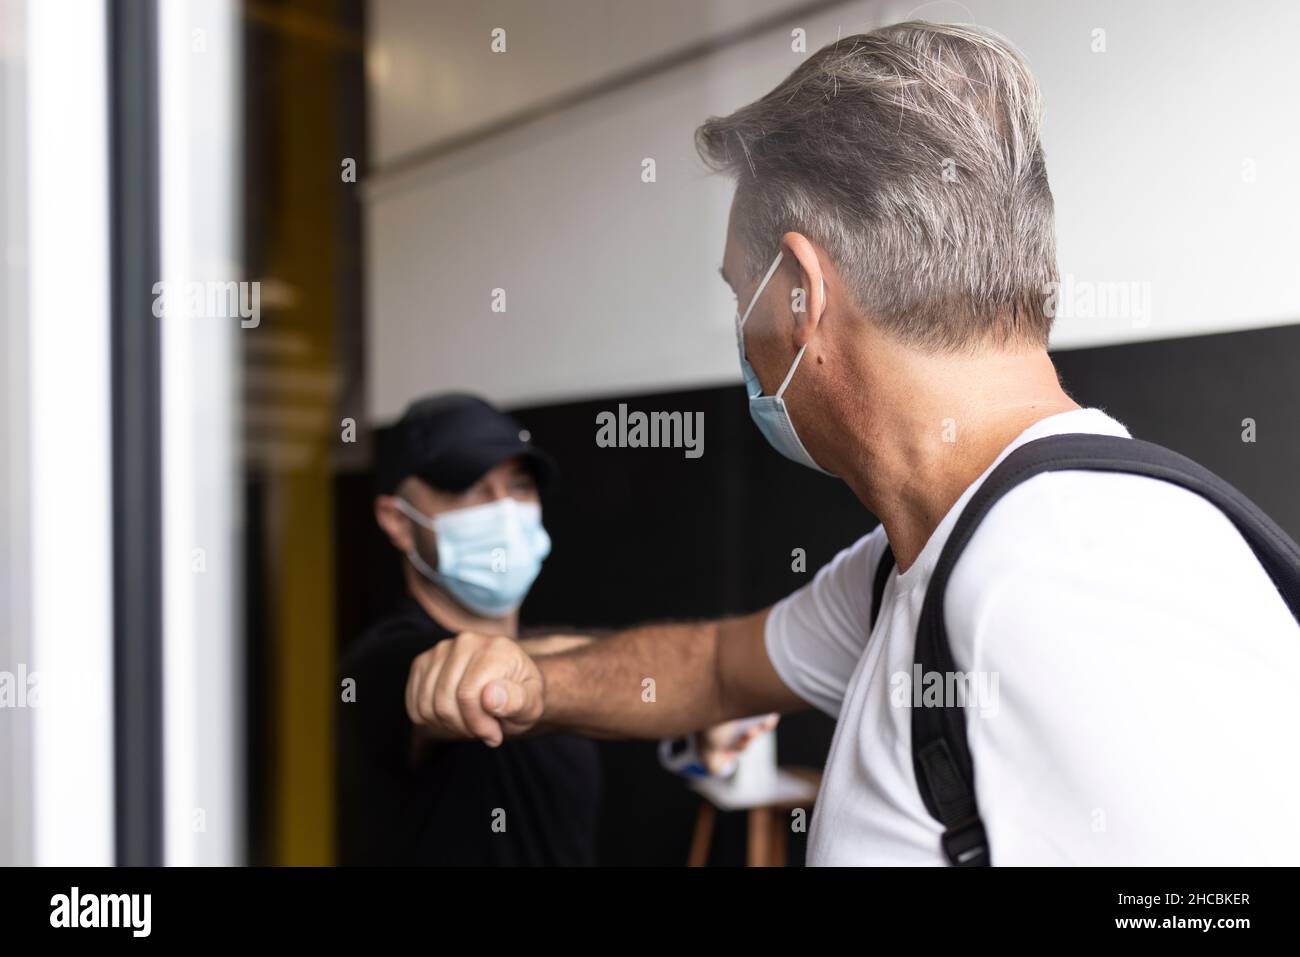 Man taking temperature of woman wearing protective face mask at doorway Stock Photo